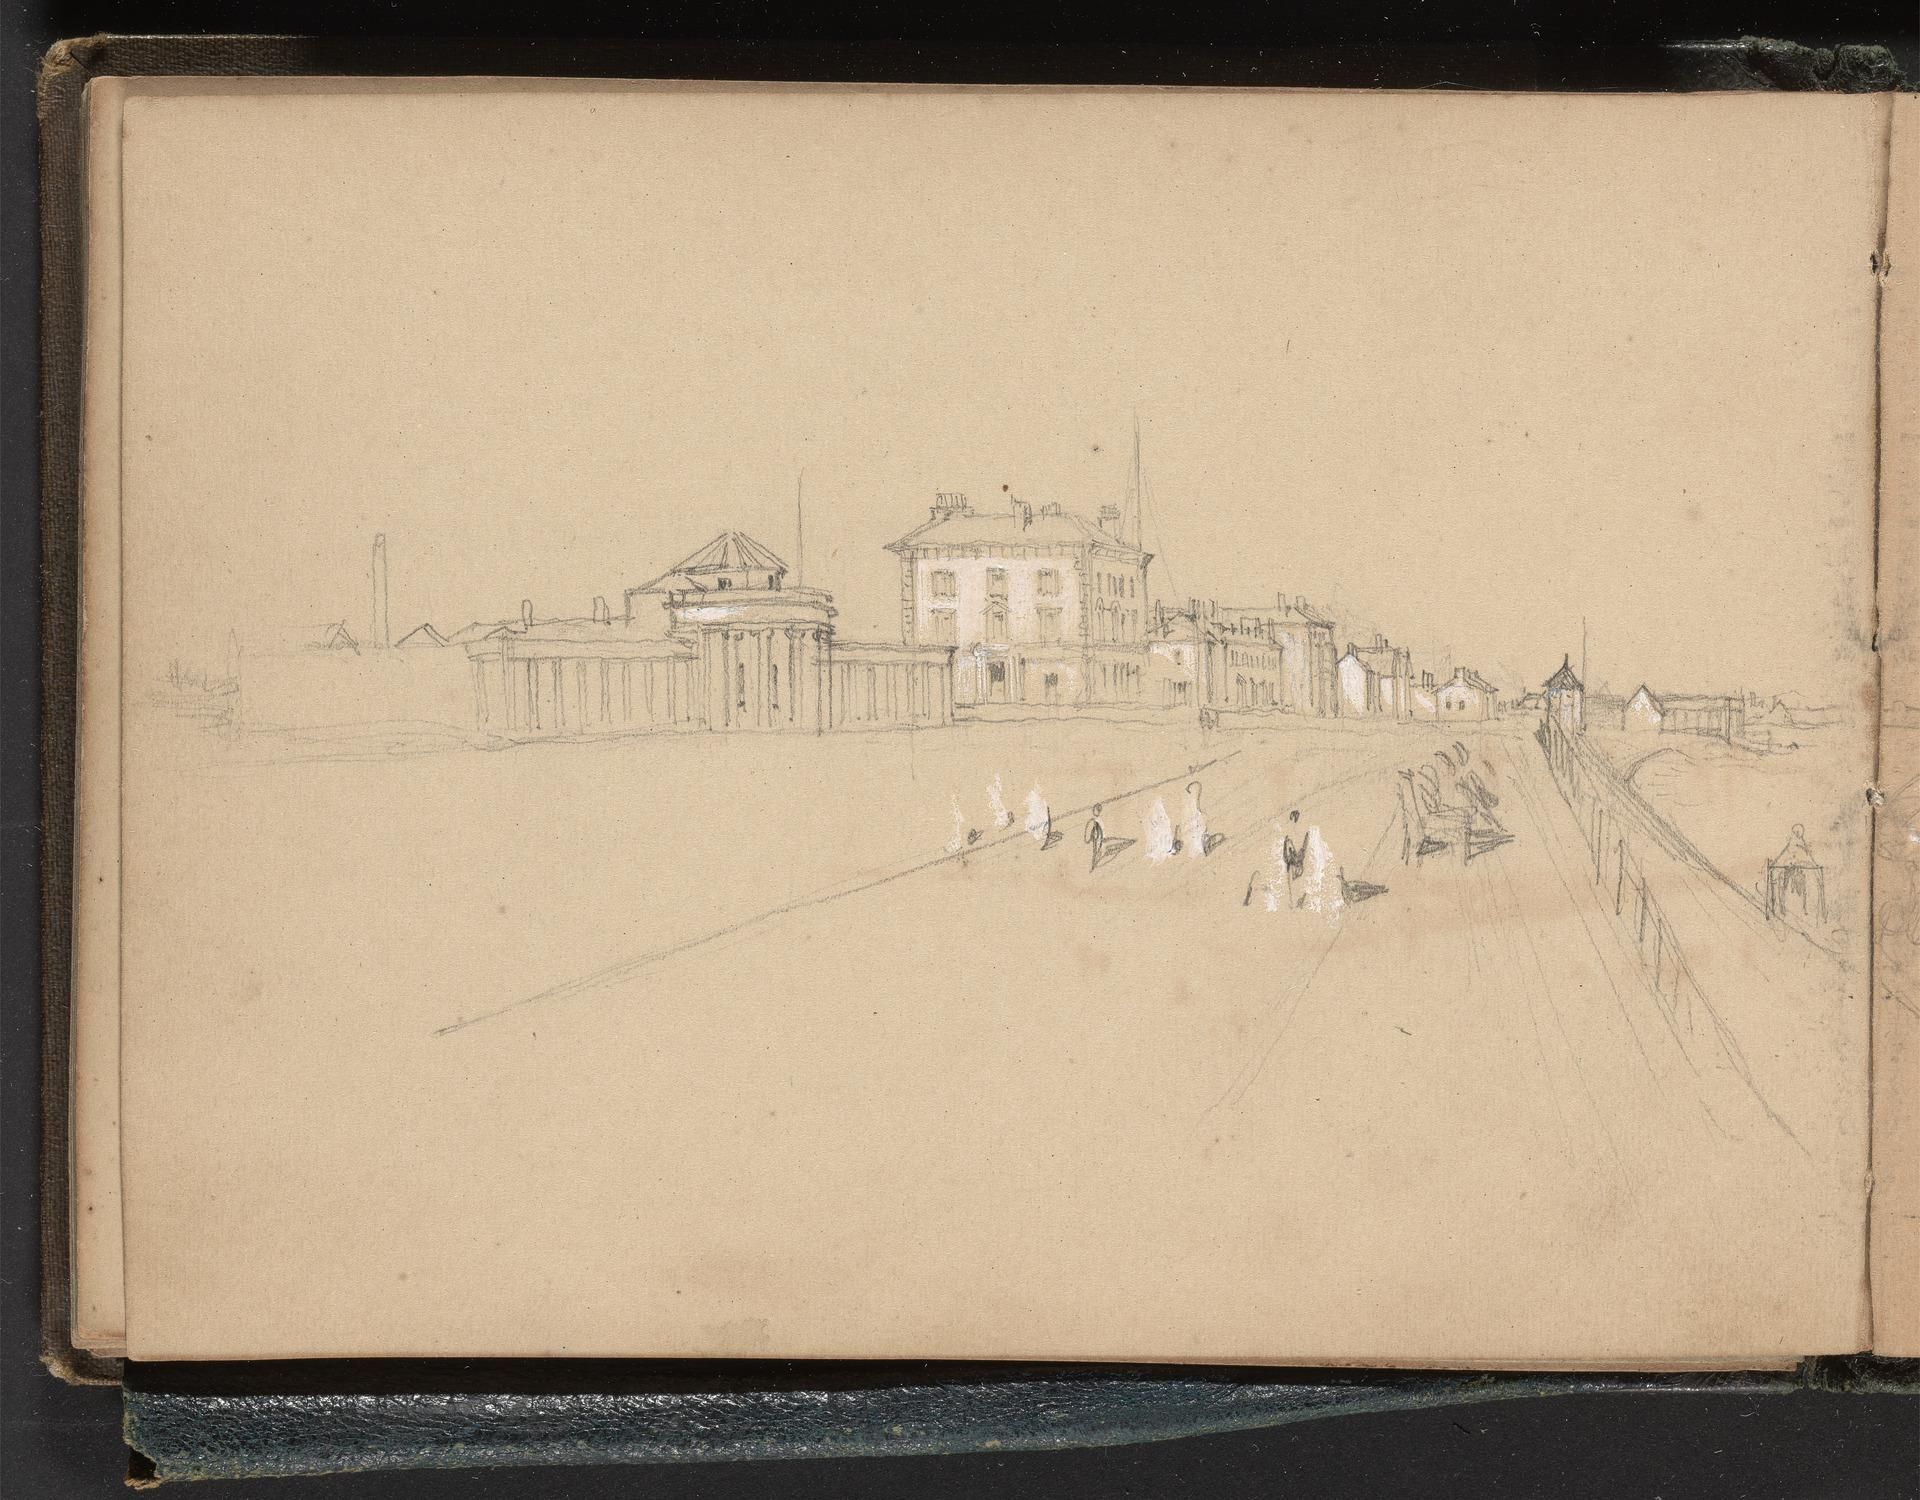 Sketch of a Seaside Town with Promenade